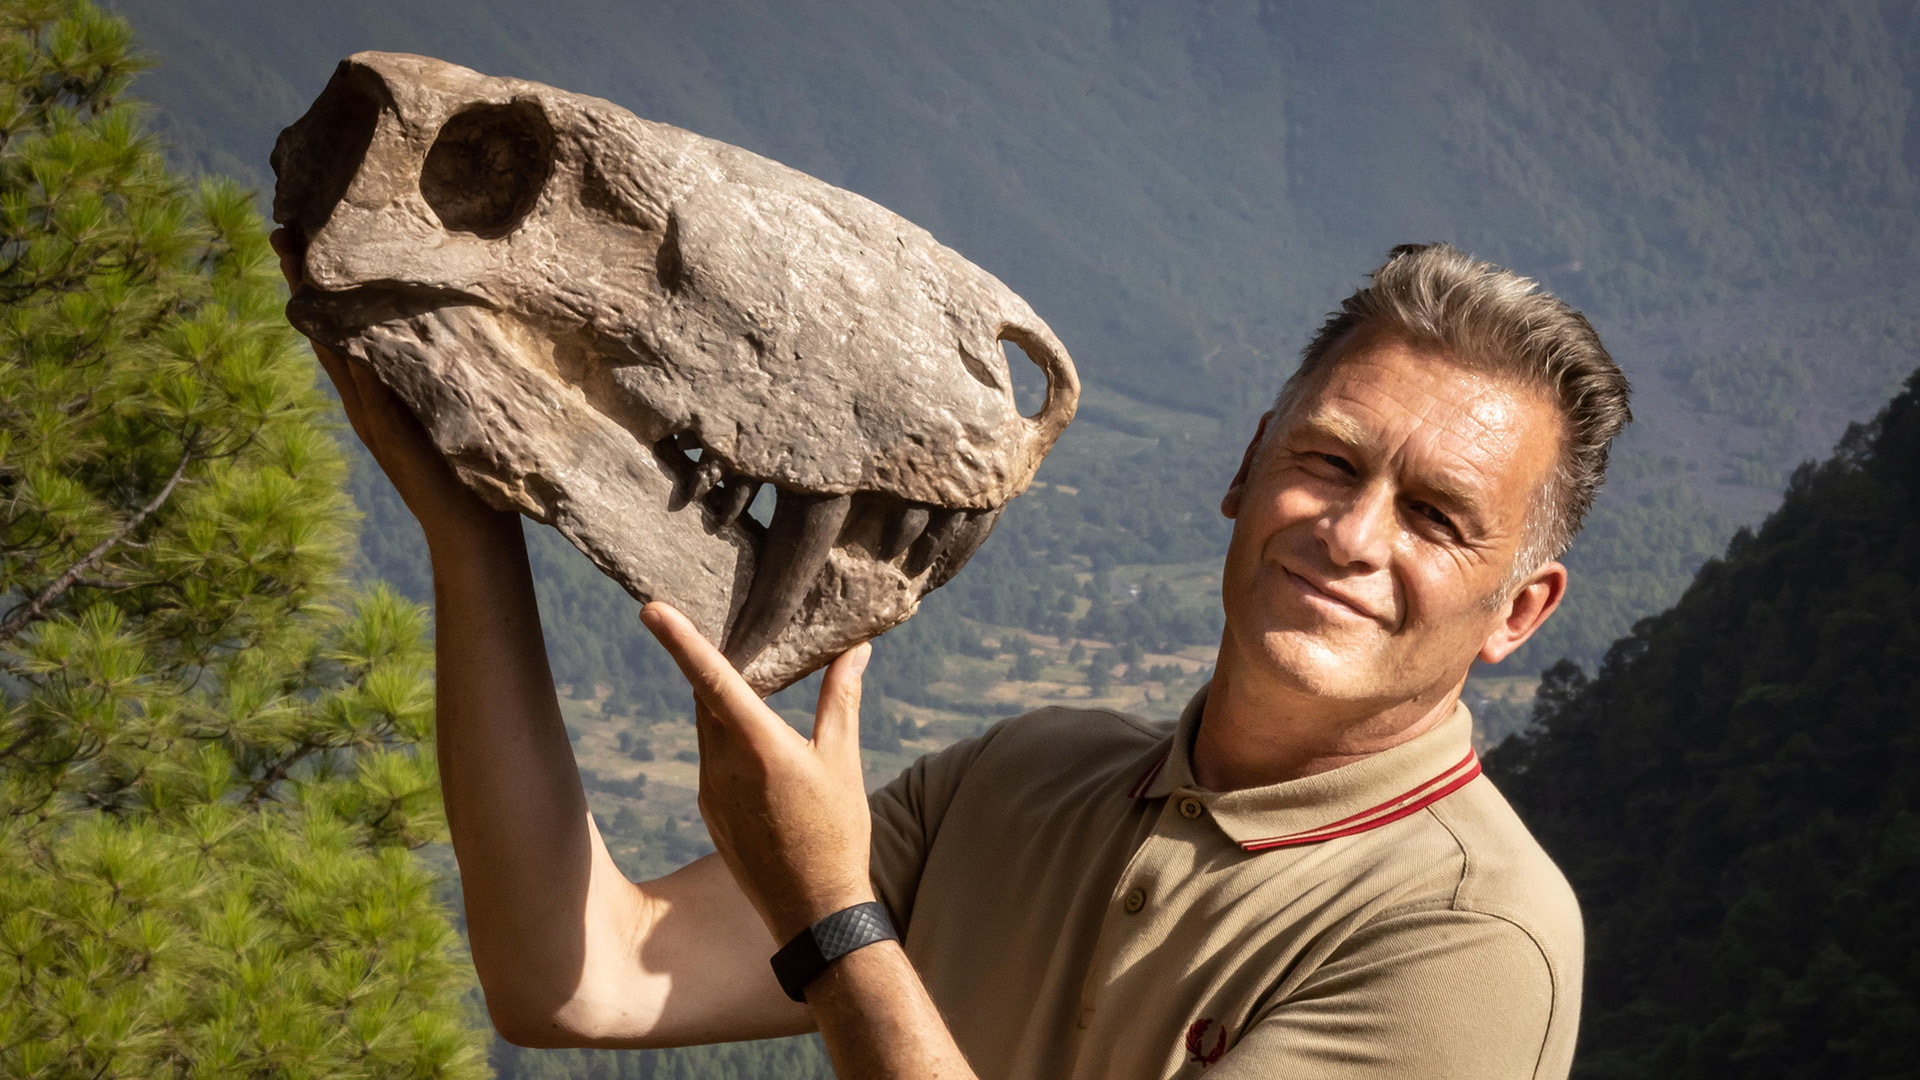 Chris Packham holding a dinosaur skull and smiling, in a promo shot for TV series Earth which he says is fuelled by the same energy as Just Stop Oil